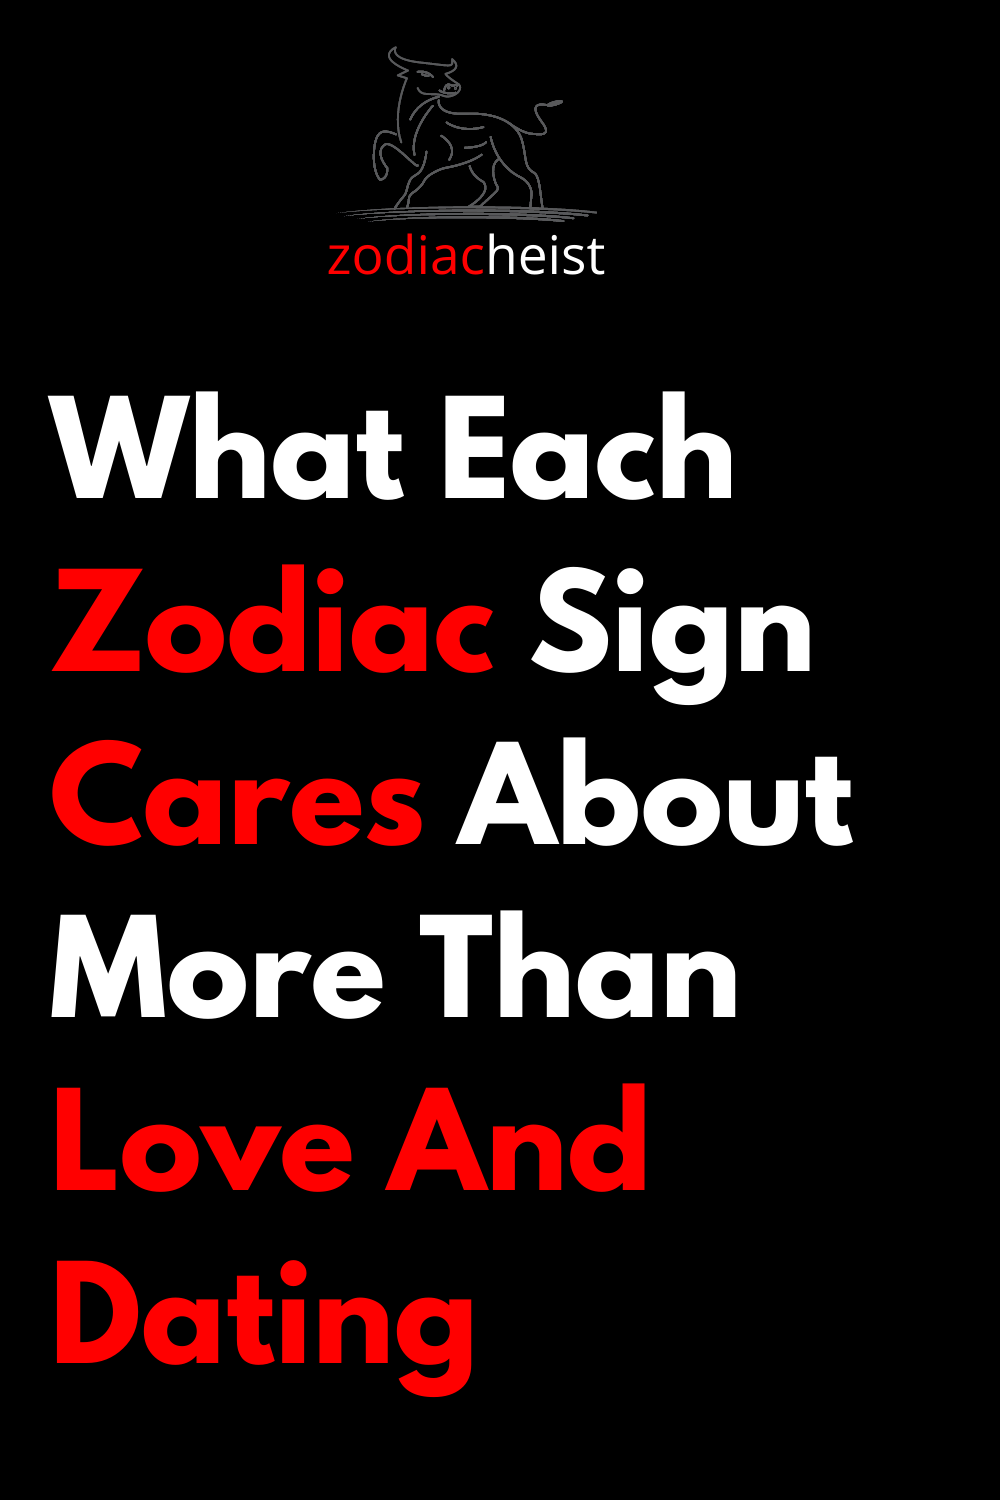 What Each Zodiac Sign Cares About More Than Love And Dating – Zodiac Heist